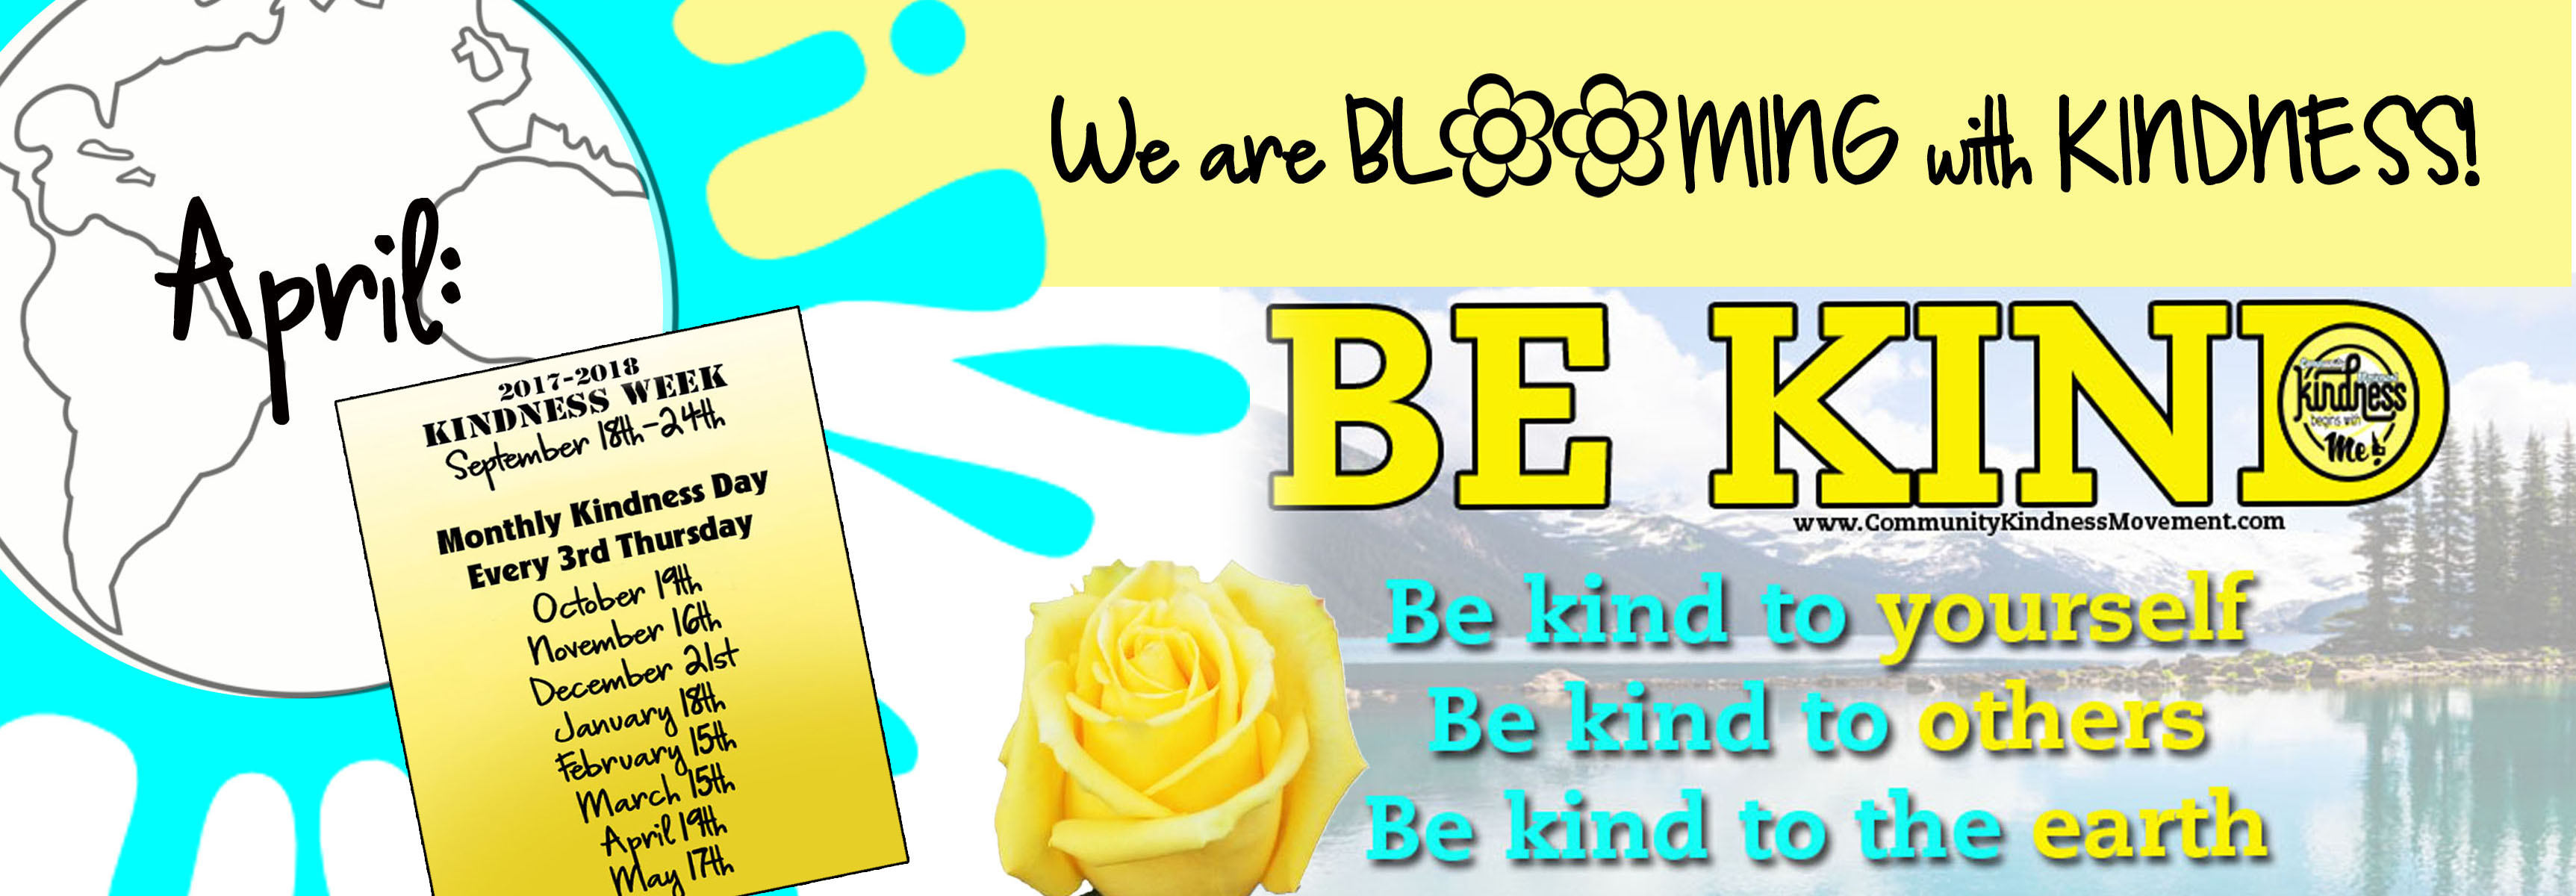 April KINDNESS DAY – Thursday, April 19th, 2018 – BLOOMING WITH KINDNESS!